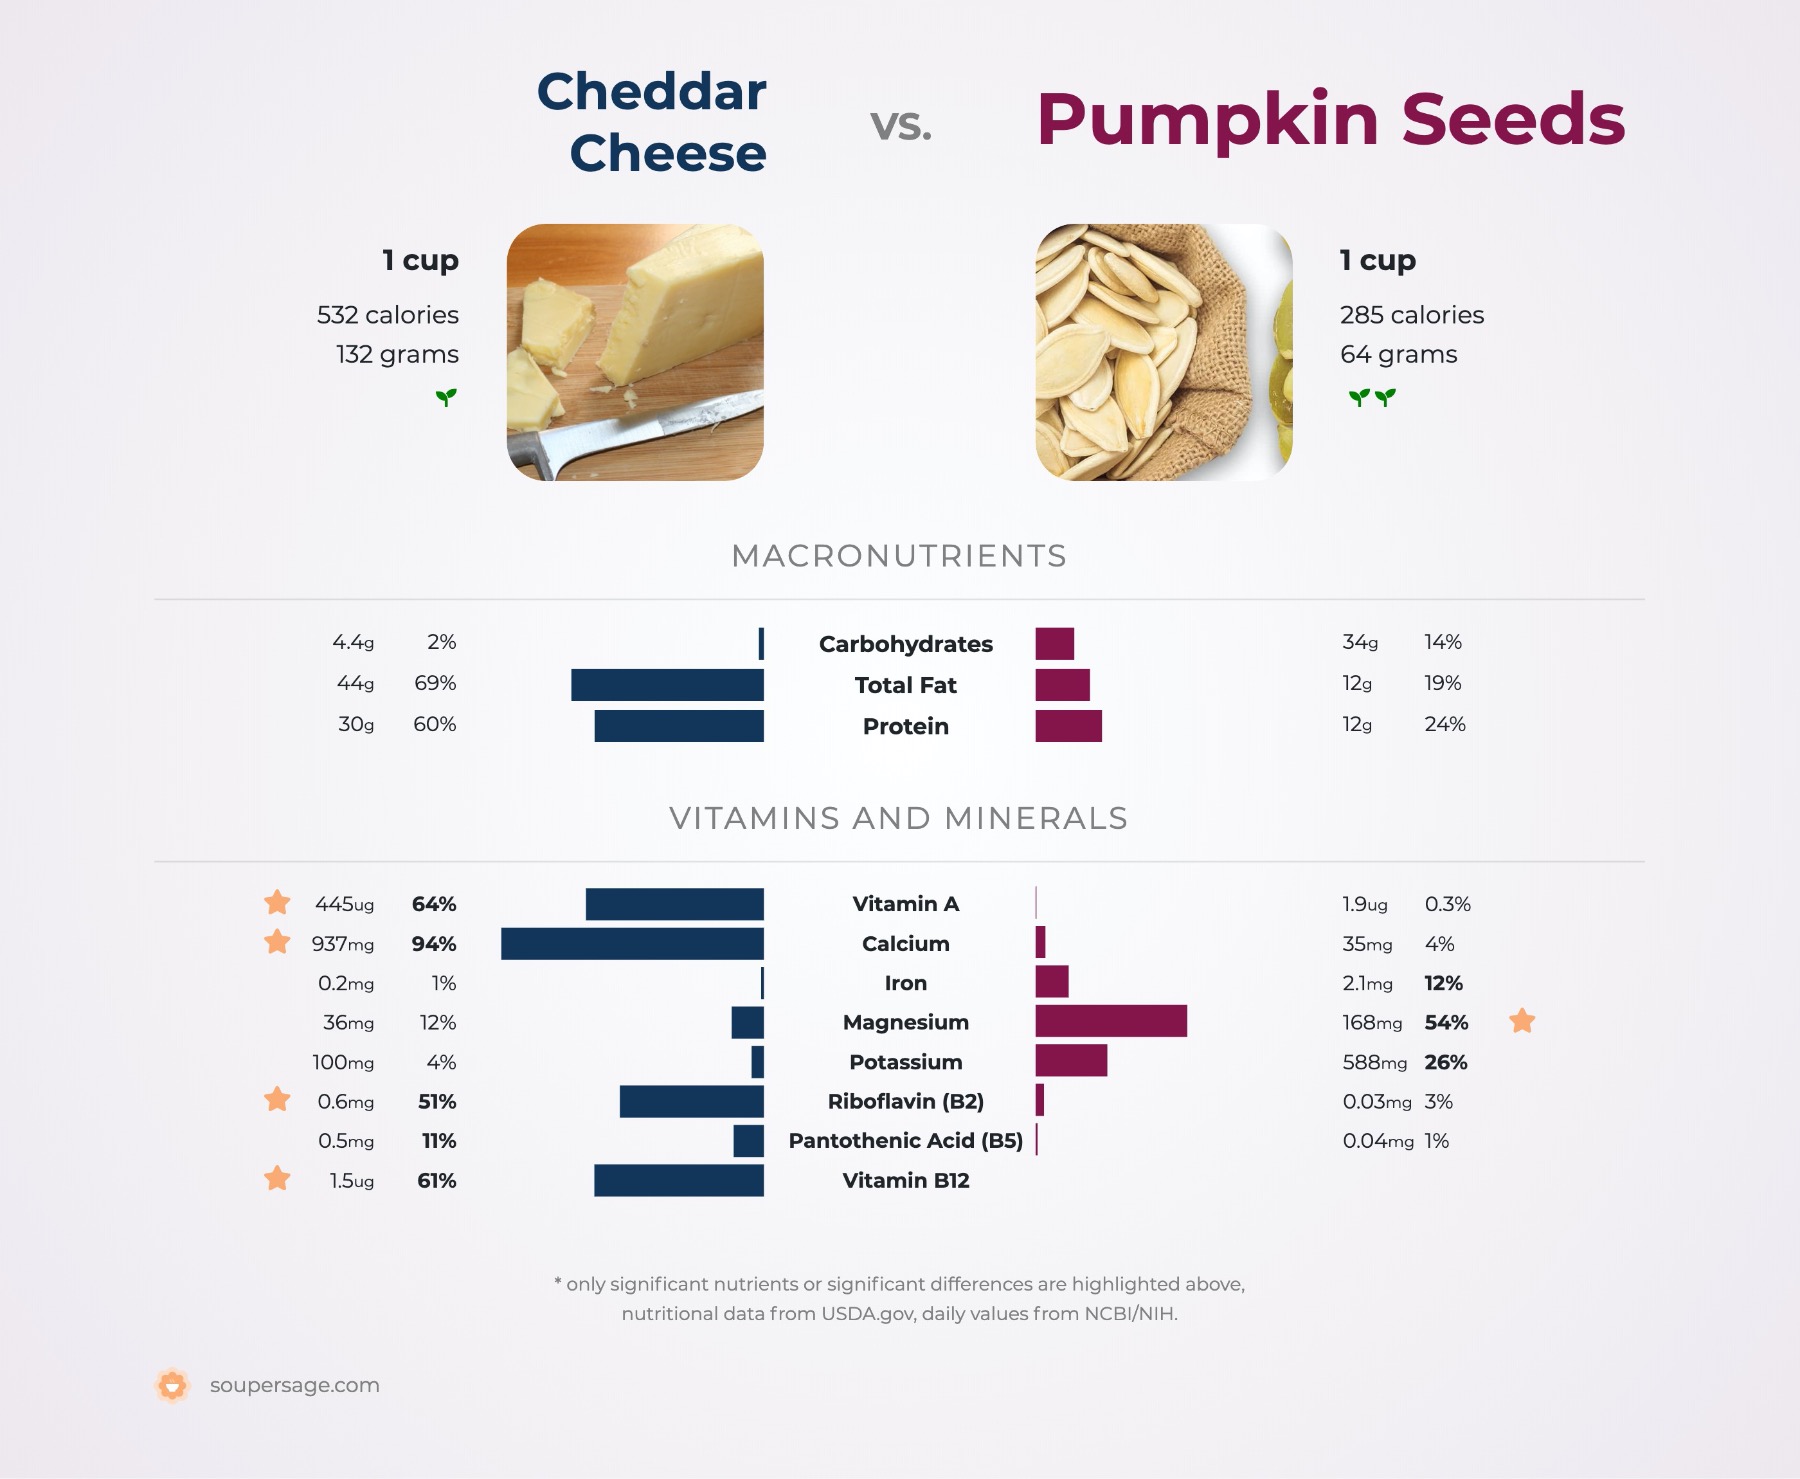 nutrition comparison of cheddar cheese vs. pumpkin seeds